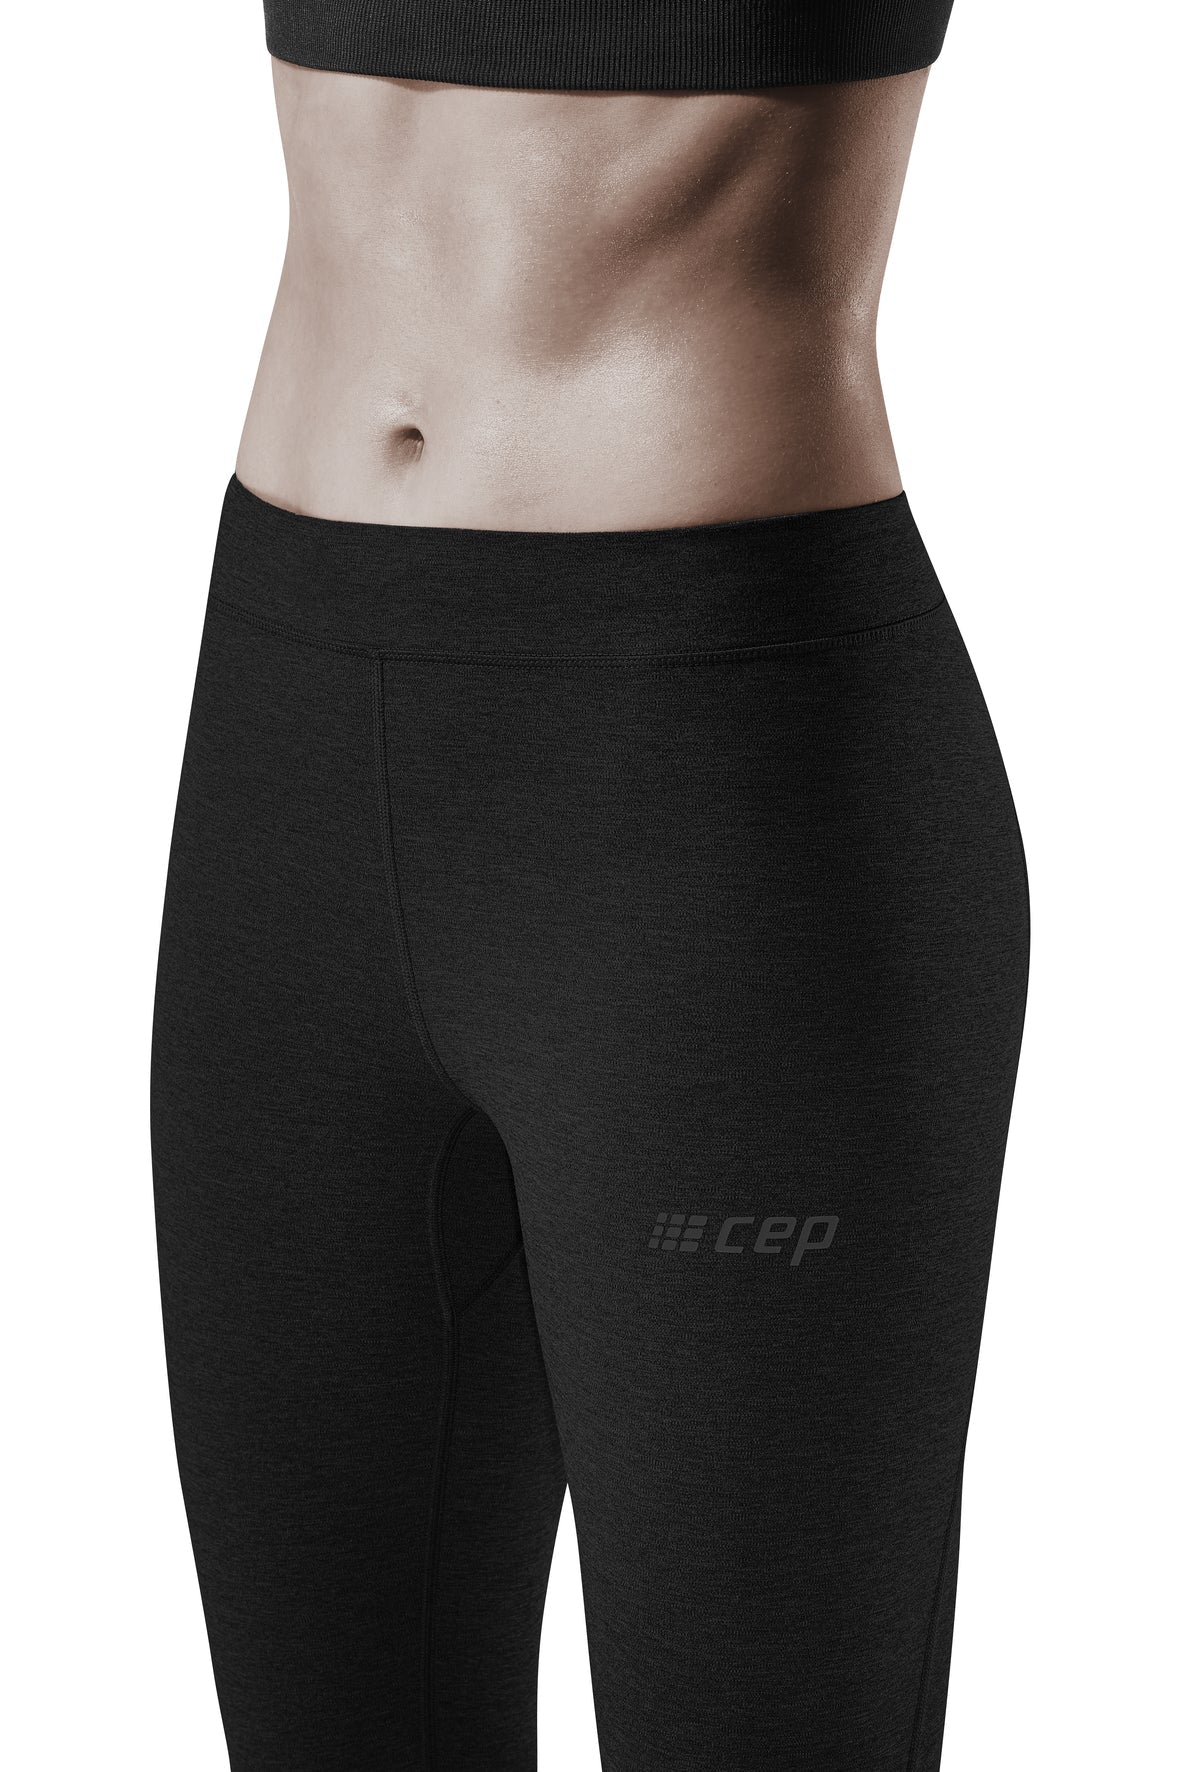 CEP Compression Training Tights, Women, Detail 1